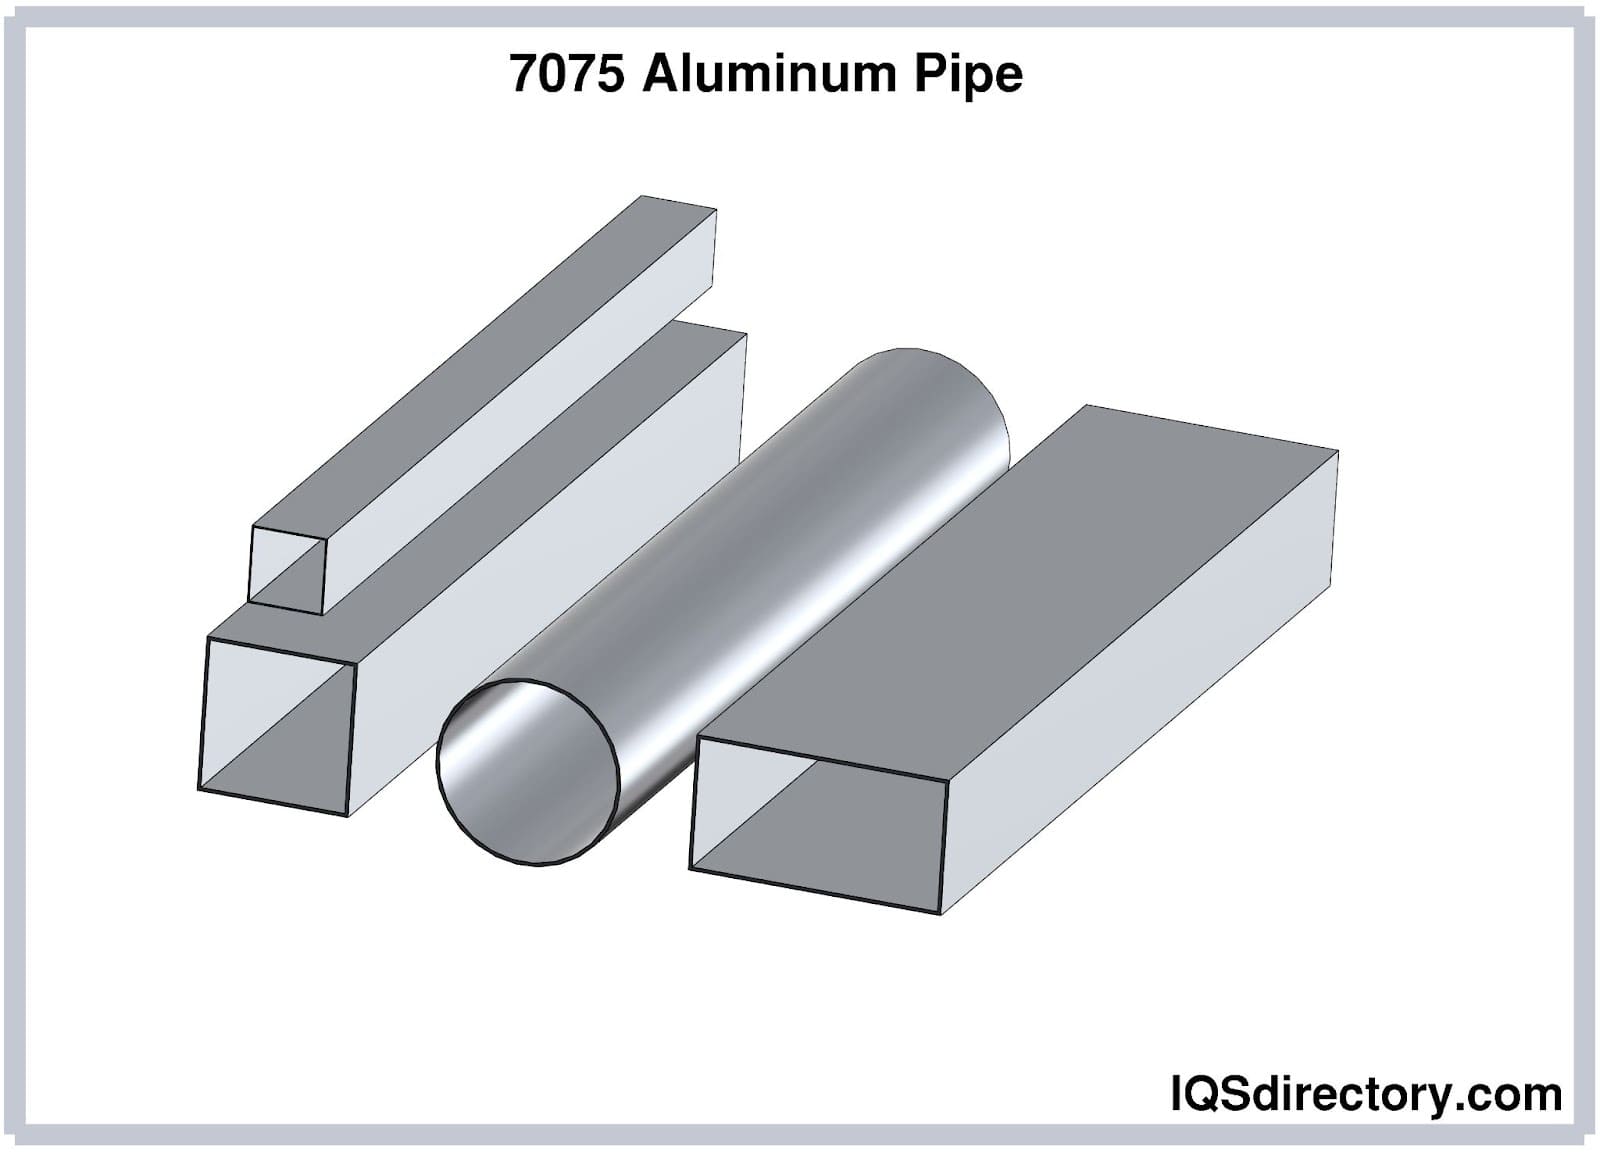 Aluminum Tubing And Piping Types Applications Benefits And Manufacturing